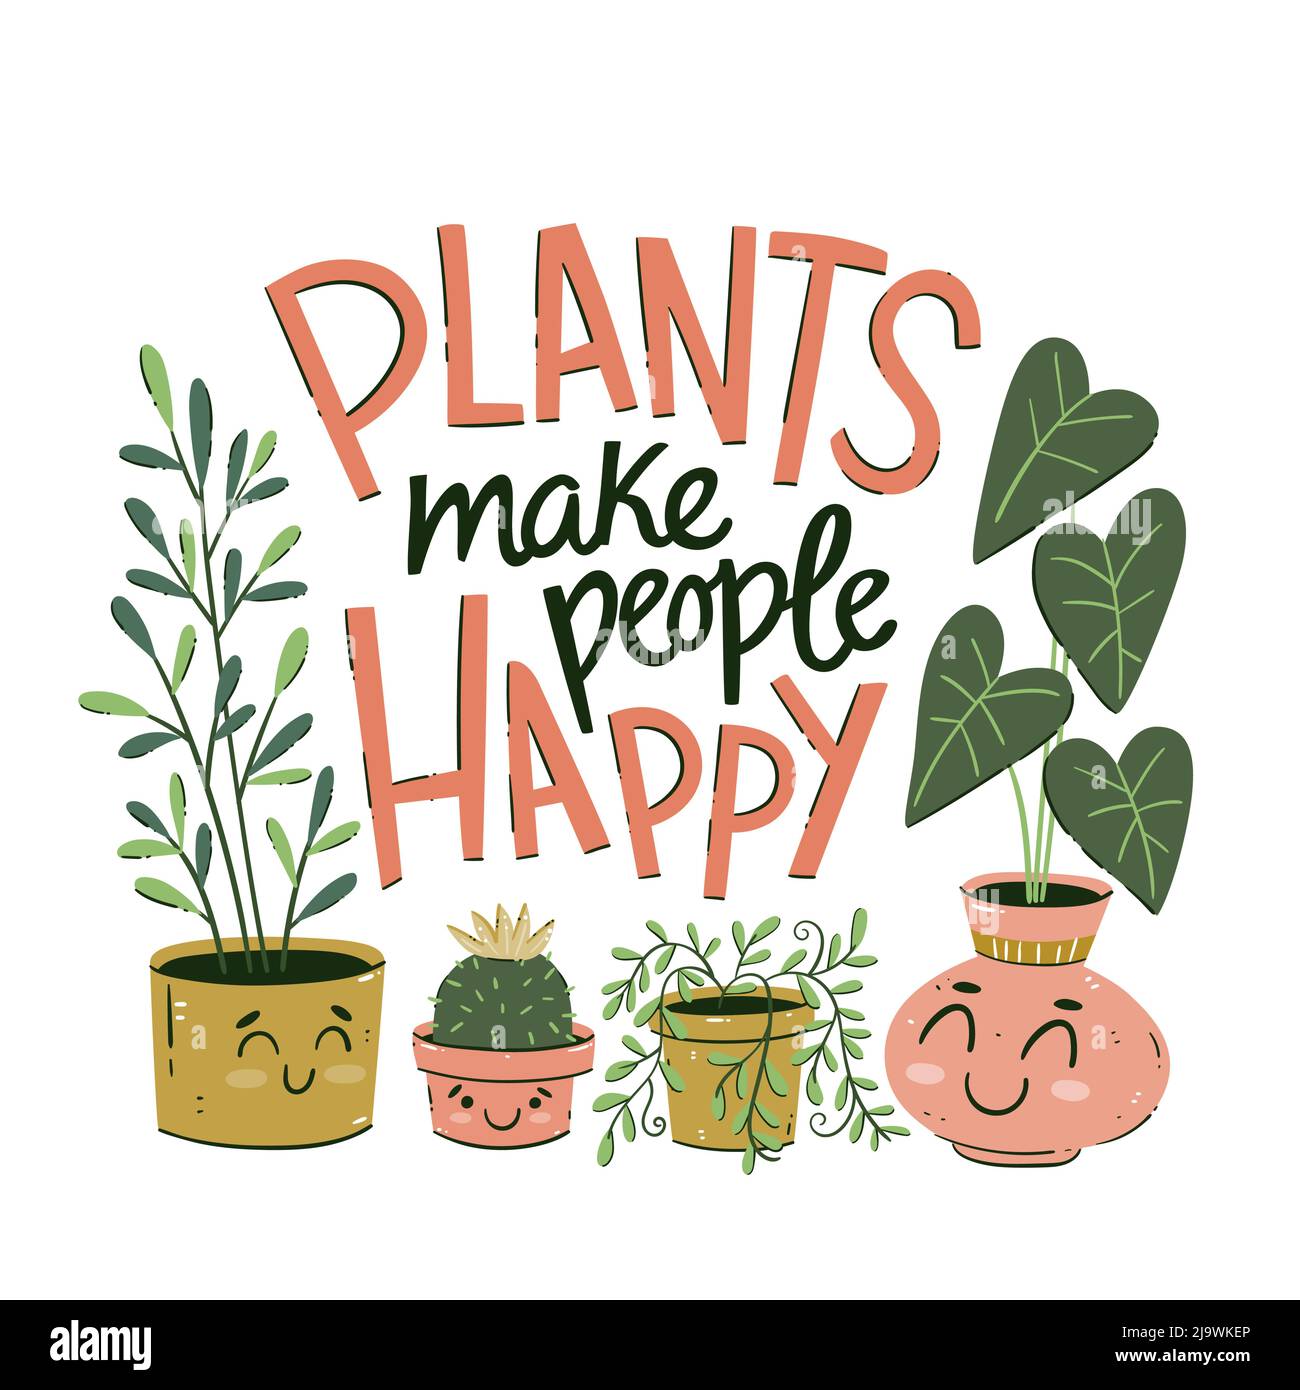 Group of plants in cartoon style with the text 'Plants Make People Happy'. Funny house plants illustration. Hand-drawn vector illustration. Stock Vector